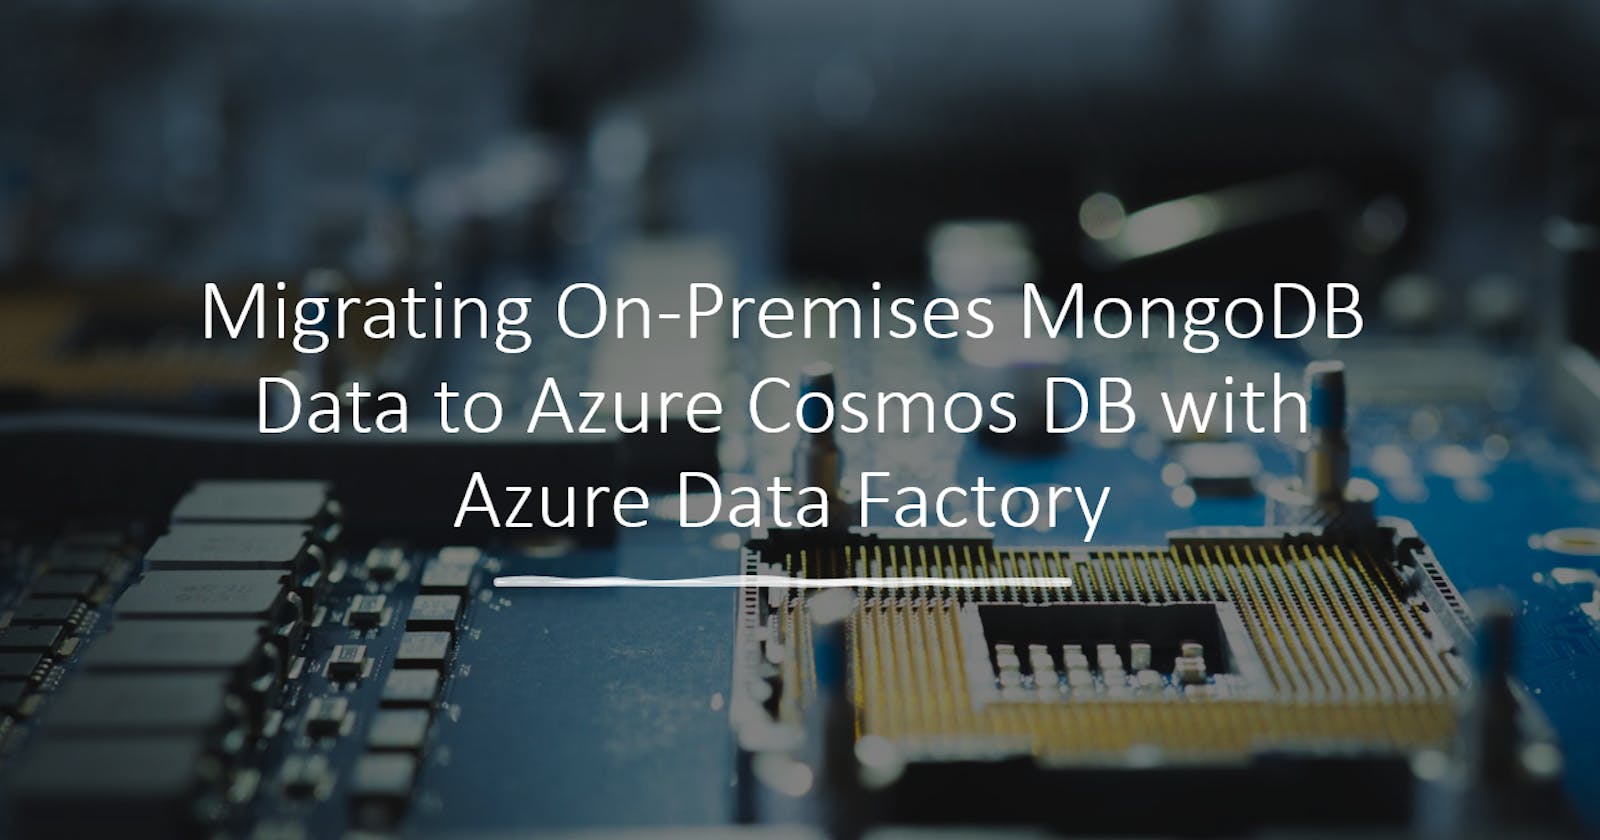 Comprehensive Guide: Migrating On-Premises MongoDB Data to Azure Cosmos DB with Azure Data Factory